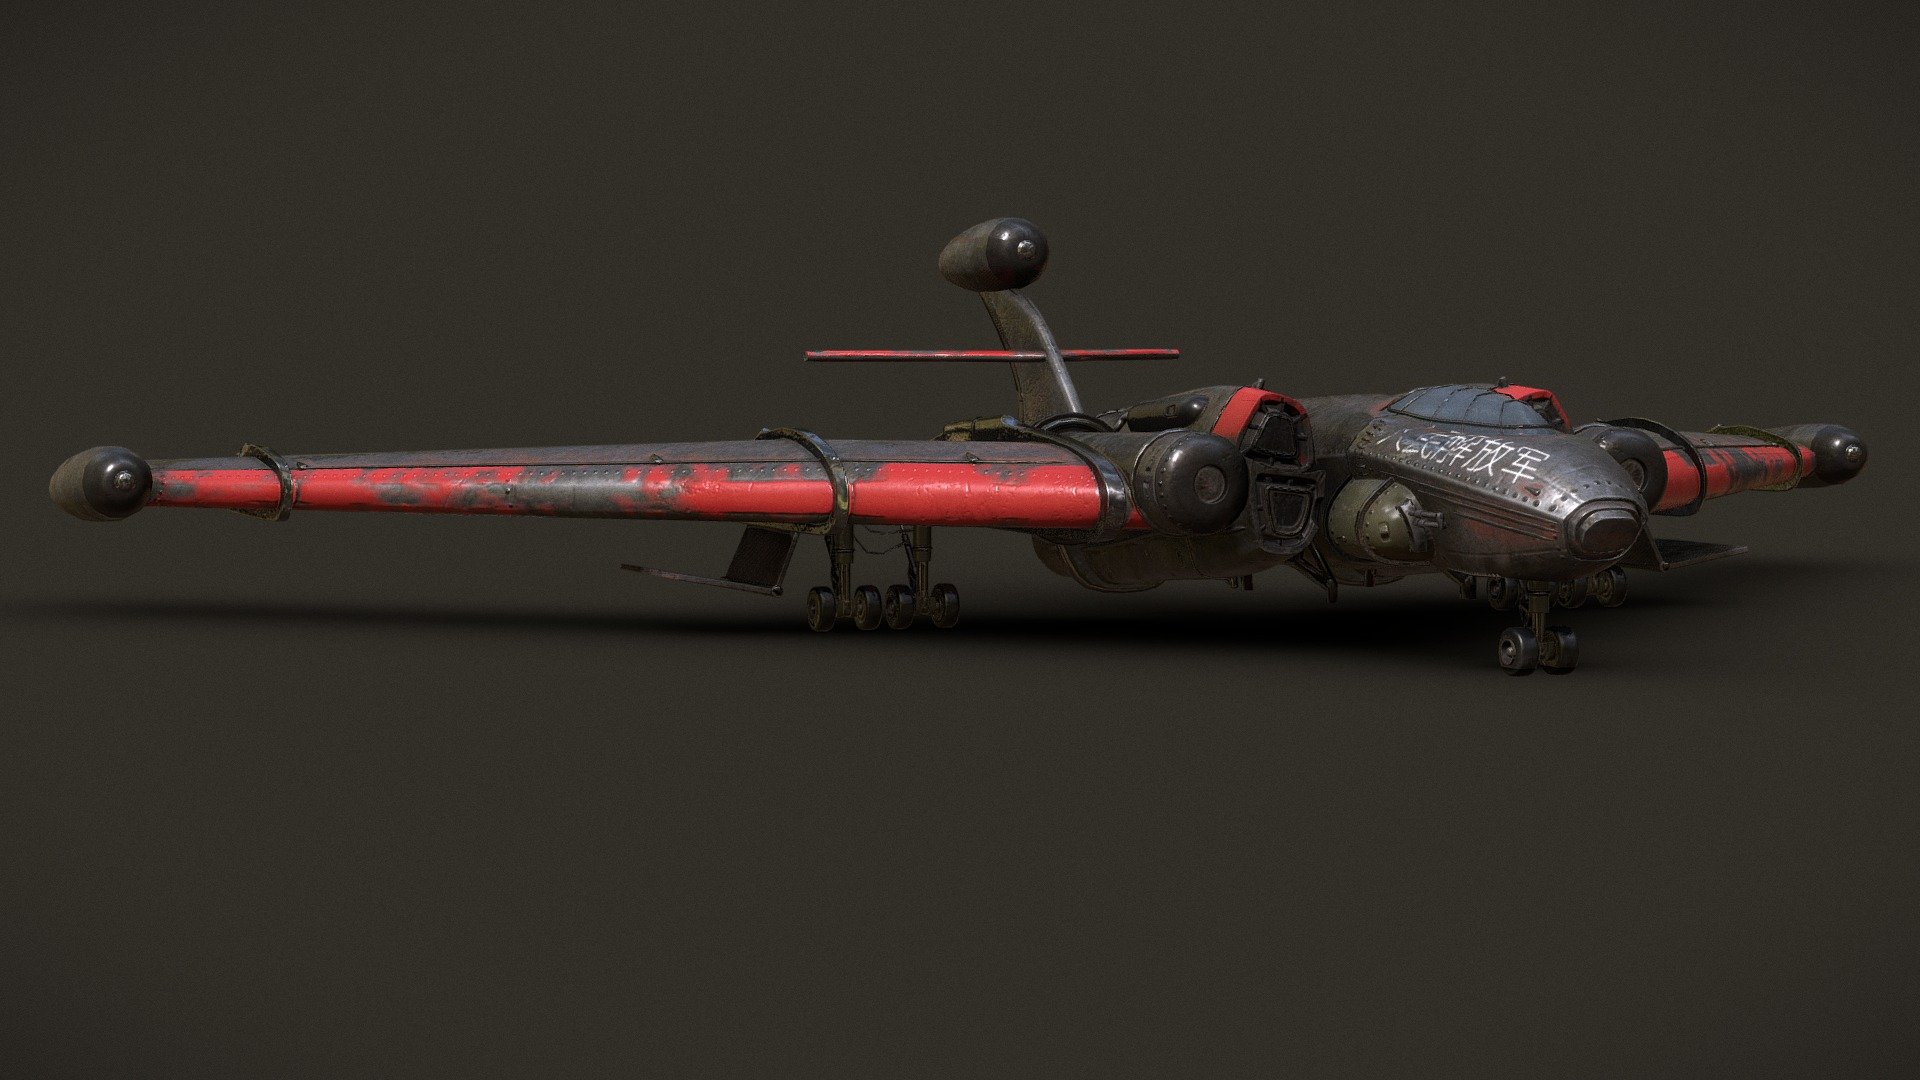 I recently purchased a fallout 4 artbook. Inspired by retrofuturism, I decided to imagine what a Chinese air force plane might look like - Fallout 4 chinese aircraft - 3D model by Nokken 3d model